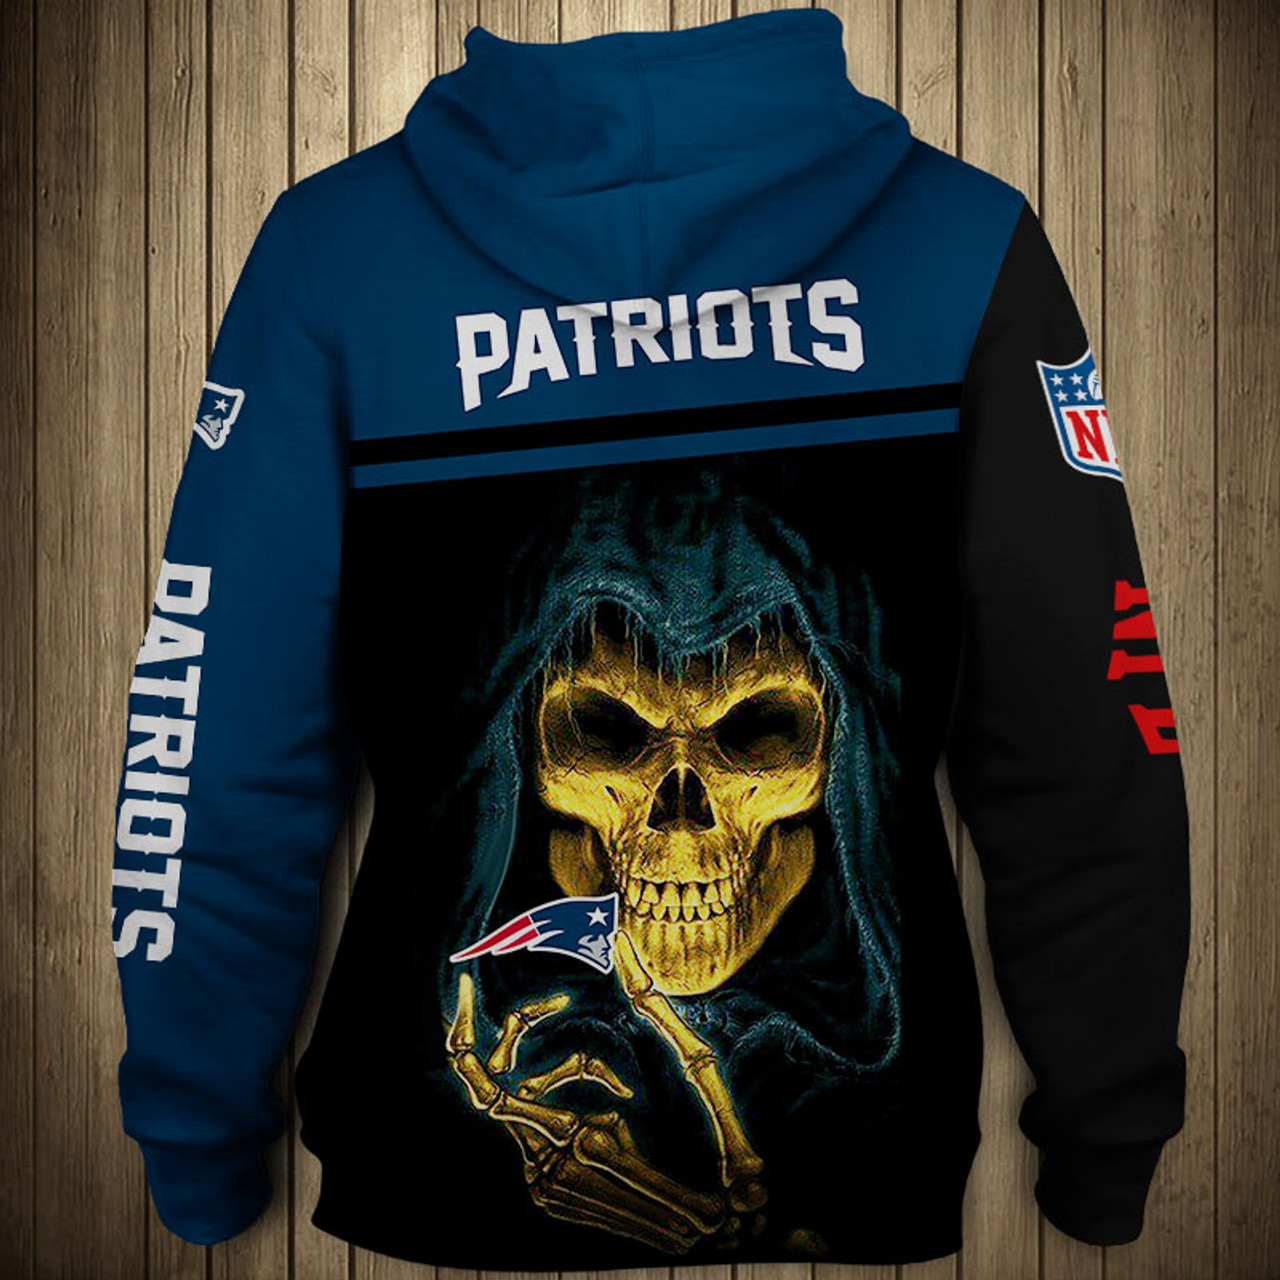 **(OFFICIAL-N.F.L.NEW-ENGLAND-PATRIOTS-TEAM-PULLOVER-HOODIES/NICE-CUSTOM-3D-GRAPHIC-PRINTED-DOUBLE-SIDED-ALL-OVER-DESIGN & GRAPHIC-PATRIOTS-LOGOS & OFFICIAL-PATRIOTS-TEAM-COLORS/WARM-PREMIUM-OFFICIAL-N.F.L.PATRIOTS-TEAM-PULLOVER-GAME-DAY-HOODIES)**